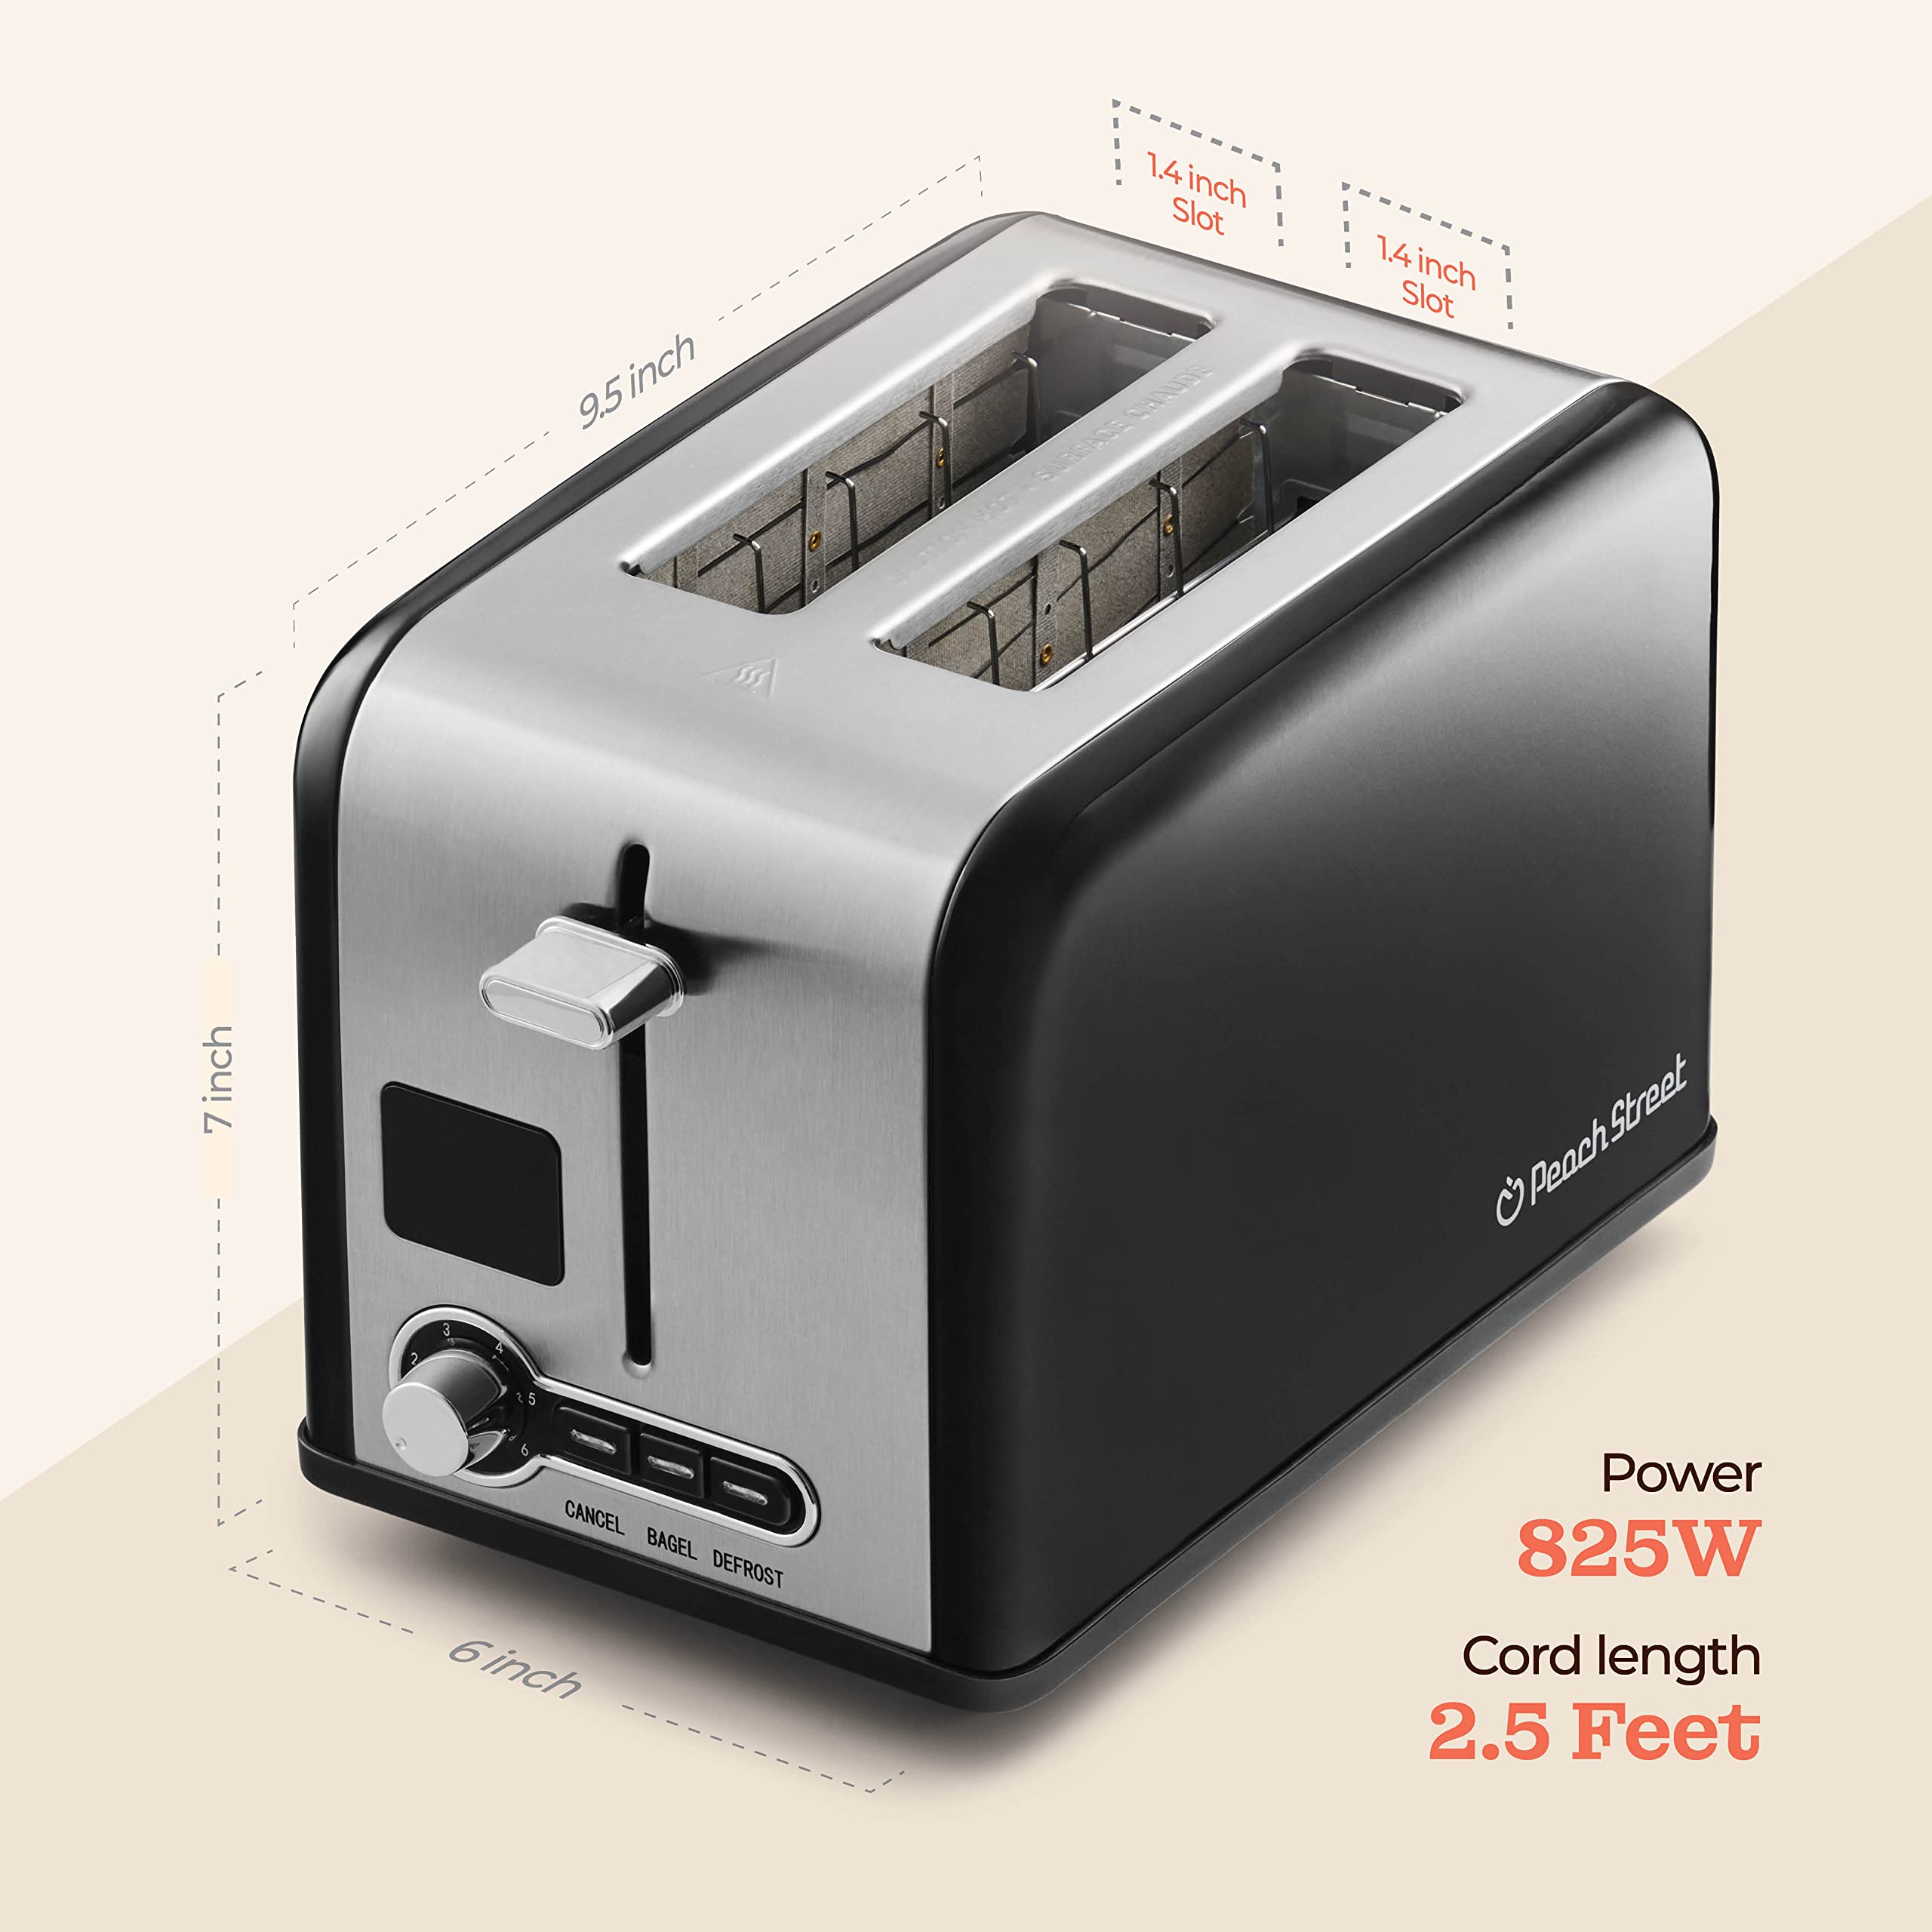 Peach Street Slice Toaster Compact Bread Toaster with Digital Countdown, Wide Slots, Auto-Pop Stainless Steel, 6 Browning Levels, Removable Crumb Tray, with Defrost, Bagel, and Cancel Function  - Good